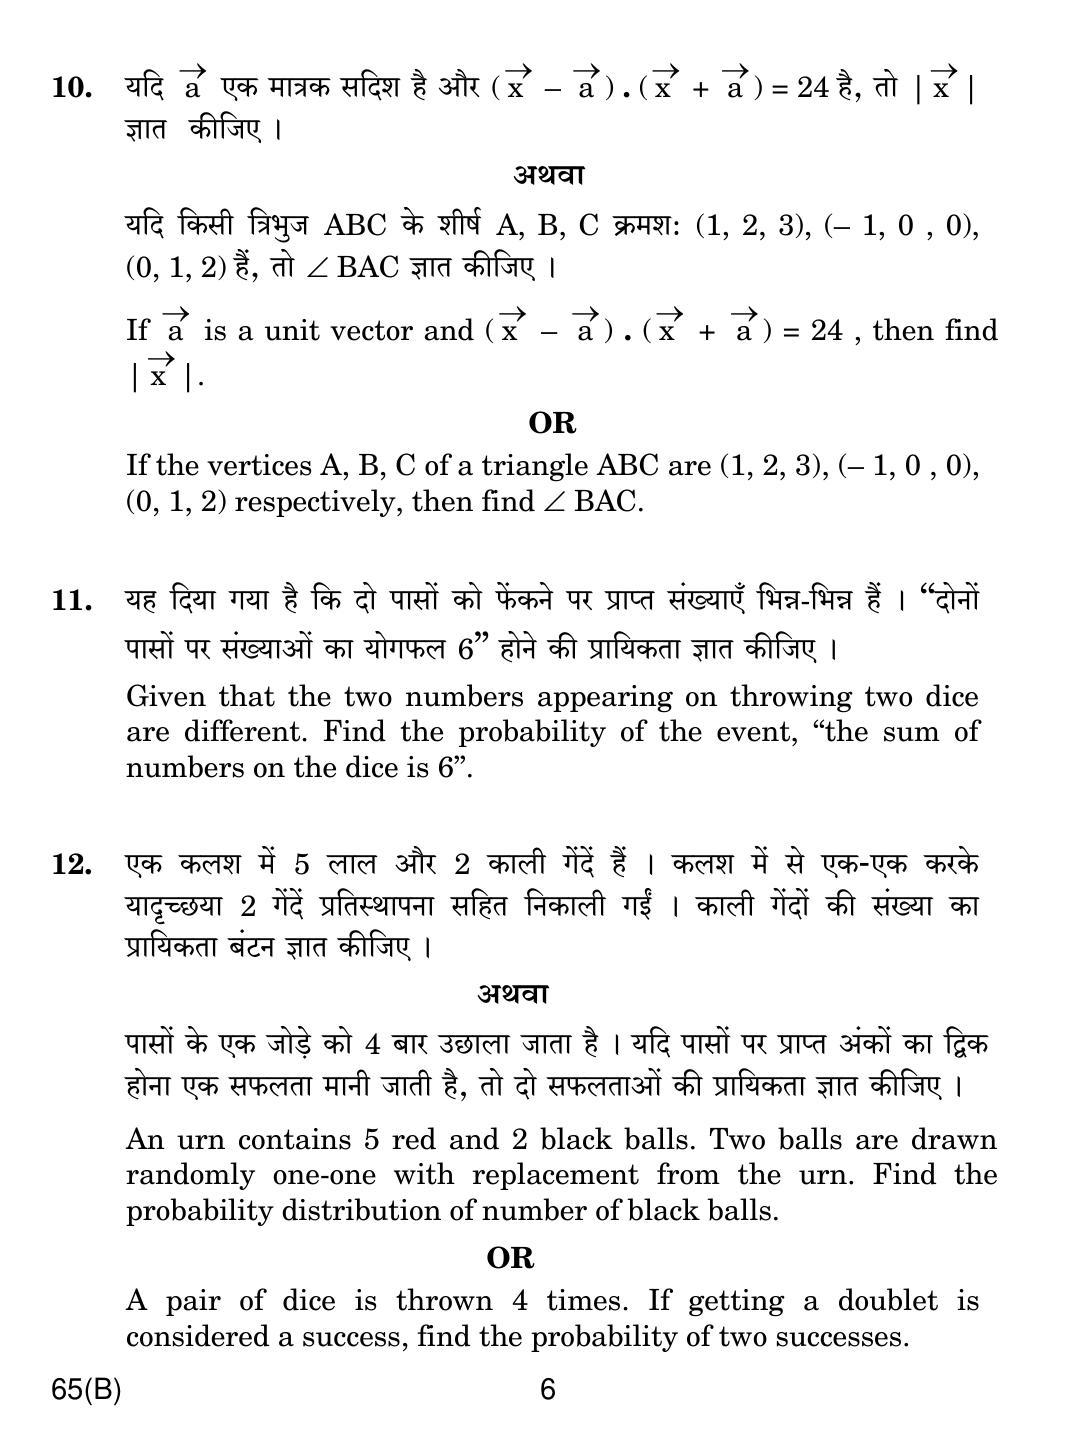 CBSE Class 12 65(B) MATHS For Blind Candidates 2019 Compartment Question Paper - Page 6